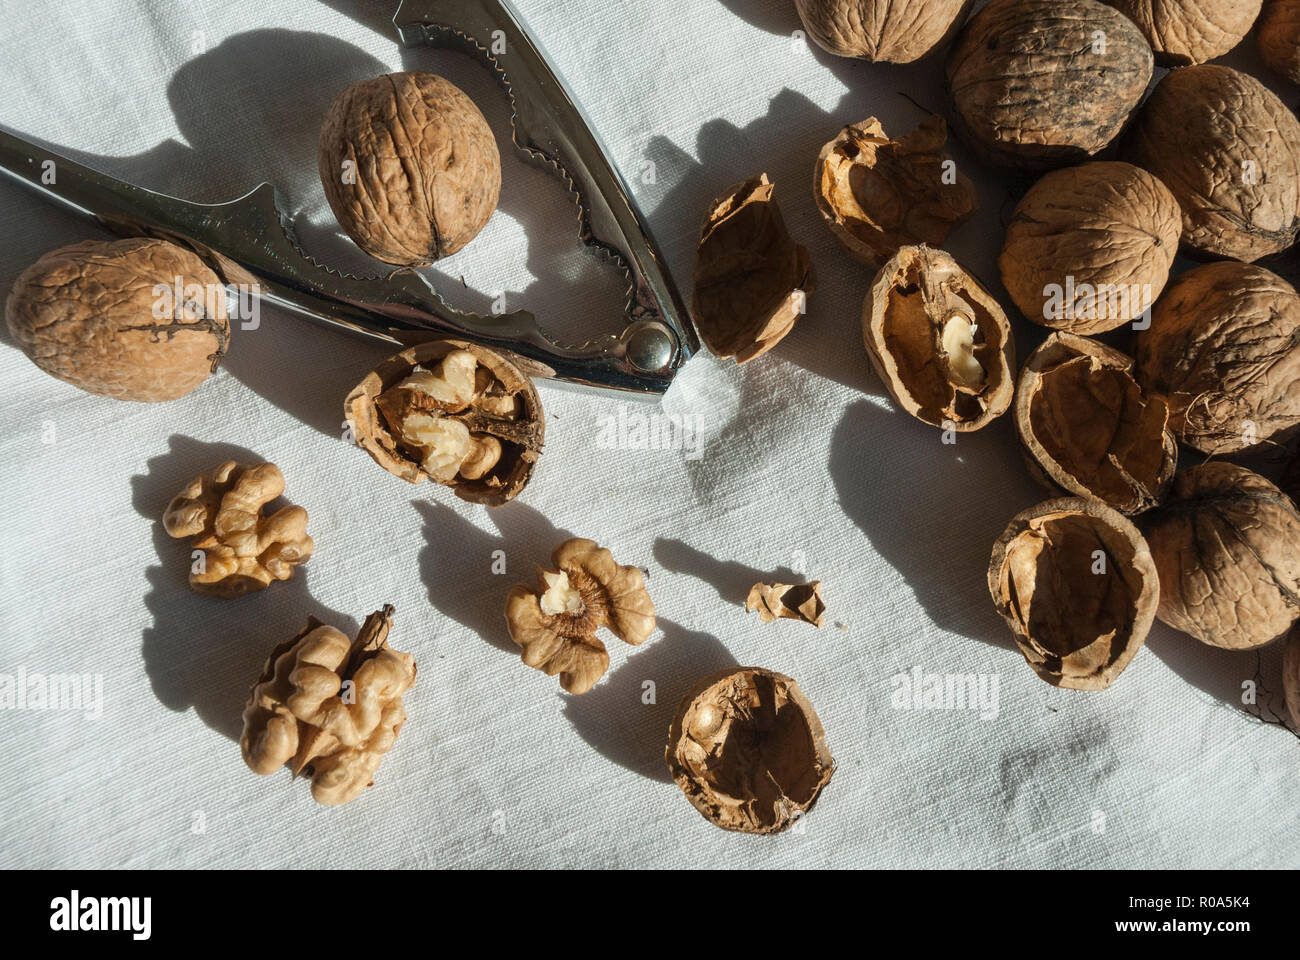 Walnuts closed and open with nuts revealed together with nutcrackers displayed on a white cloth. Stock Photo